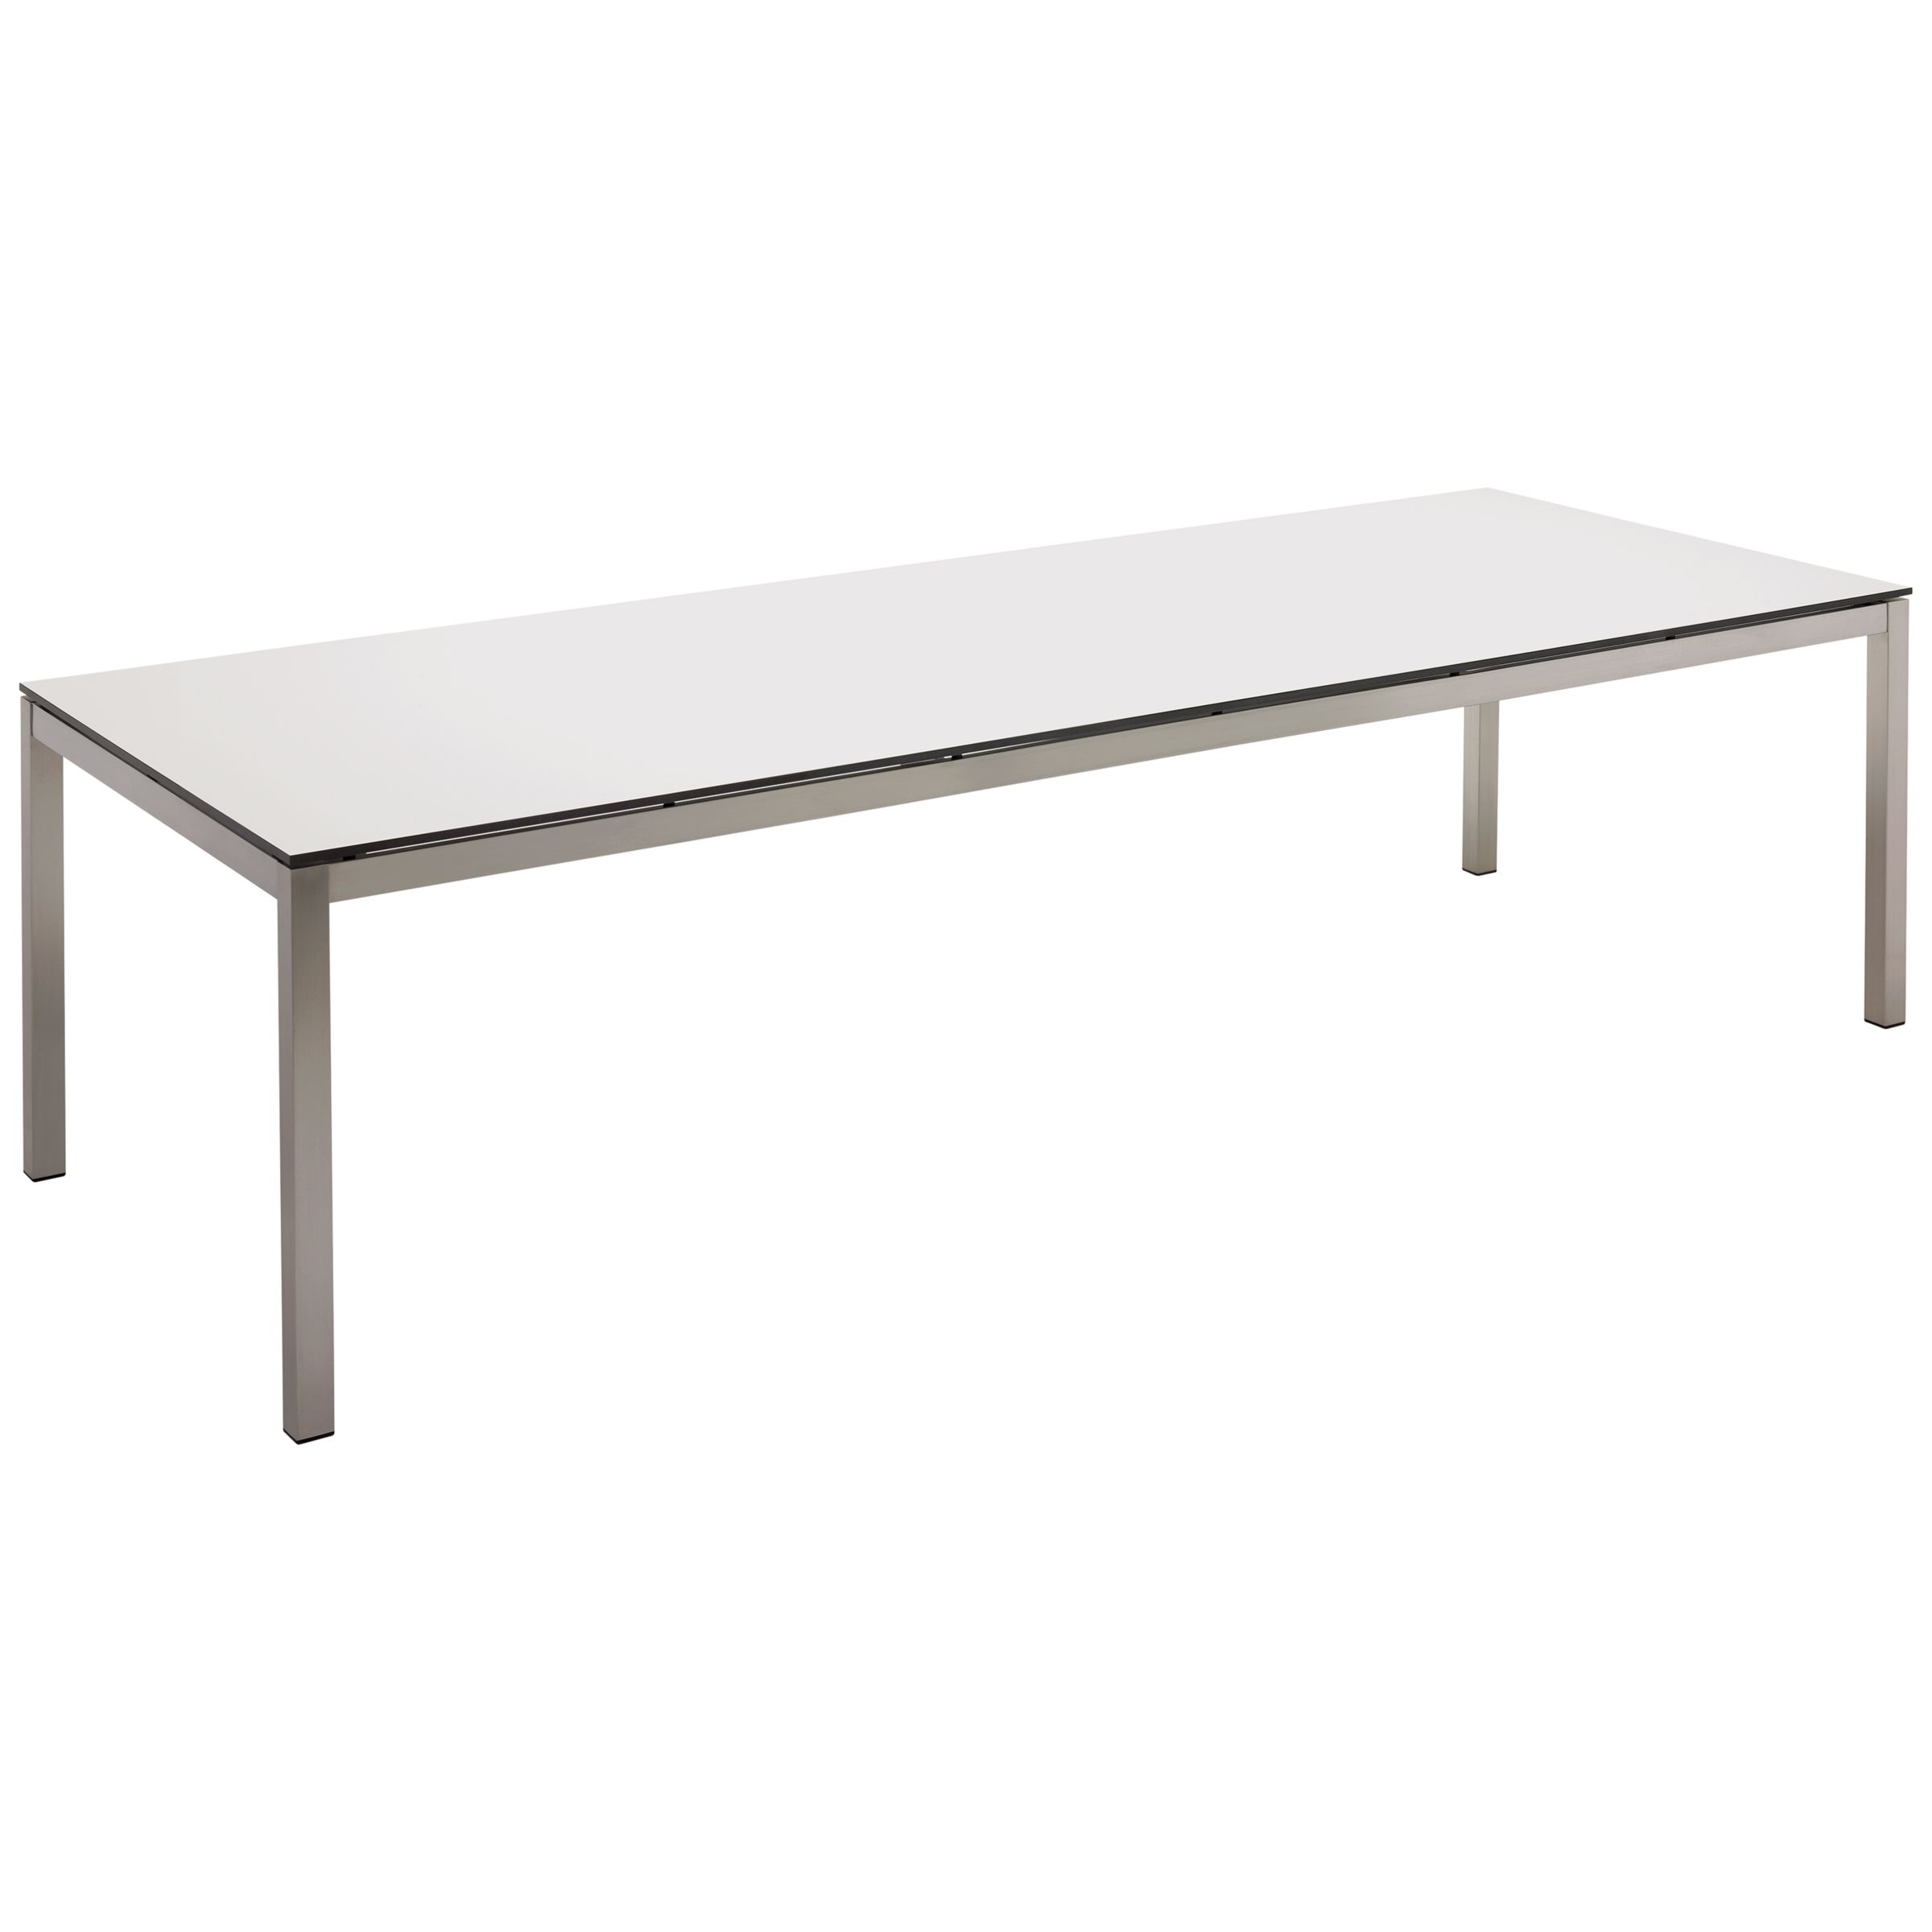 Gloster Kore Rectangular 10 Seater Outdoor Dining Table, White HPL, width 280cm